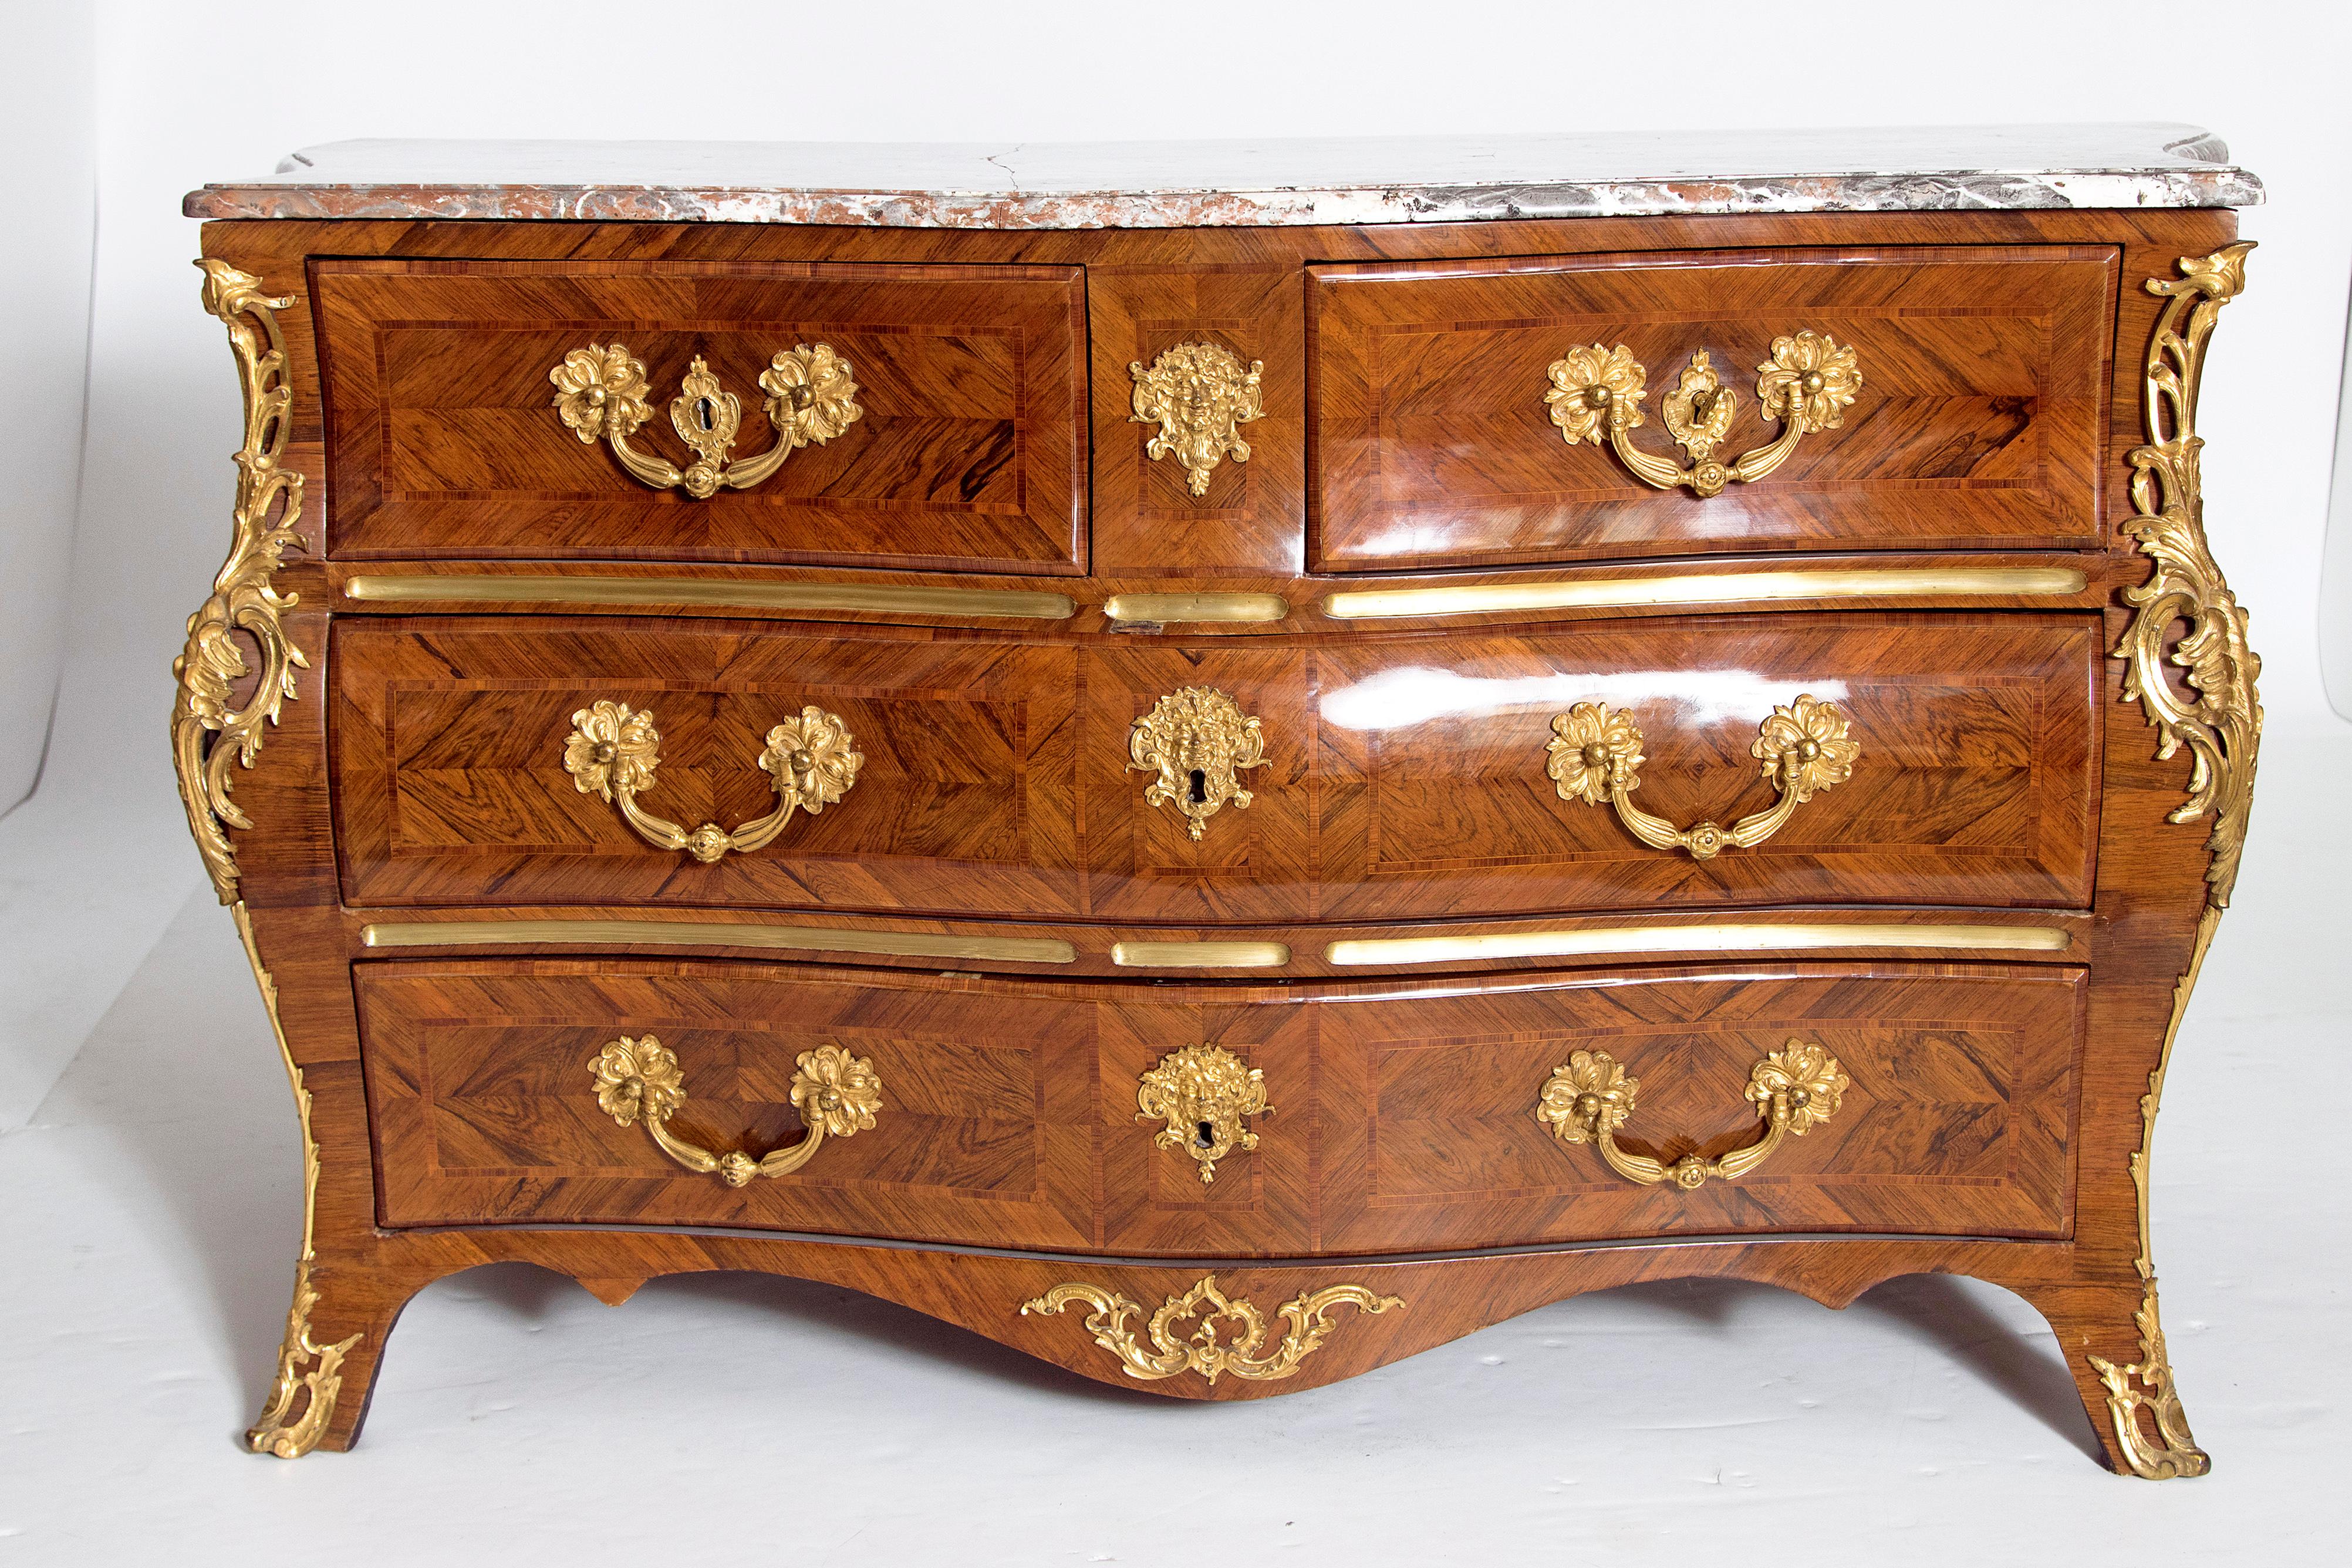 A handsome French Regence bombe four-drawer commode with dore bronze hardware, escutcheons, and trim. Two small drawers above two large drawers with key. Drawer fronts have intricate herringbone inlay all around. The inlay continues on two panels on